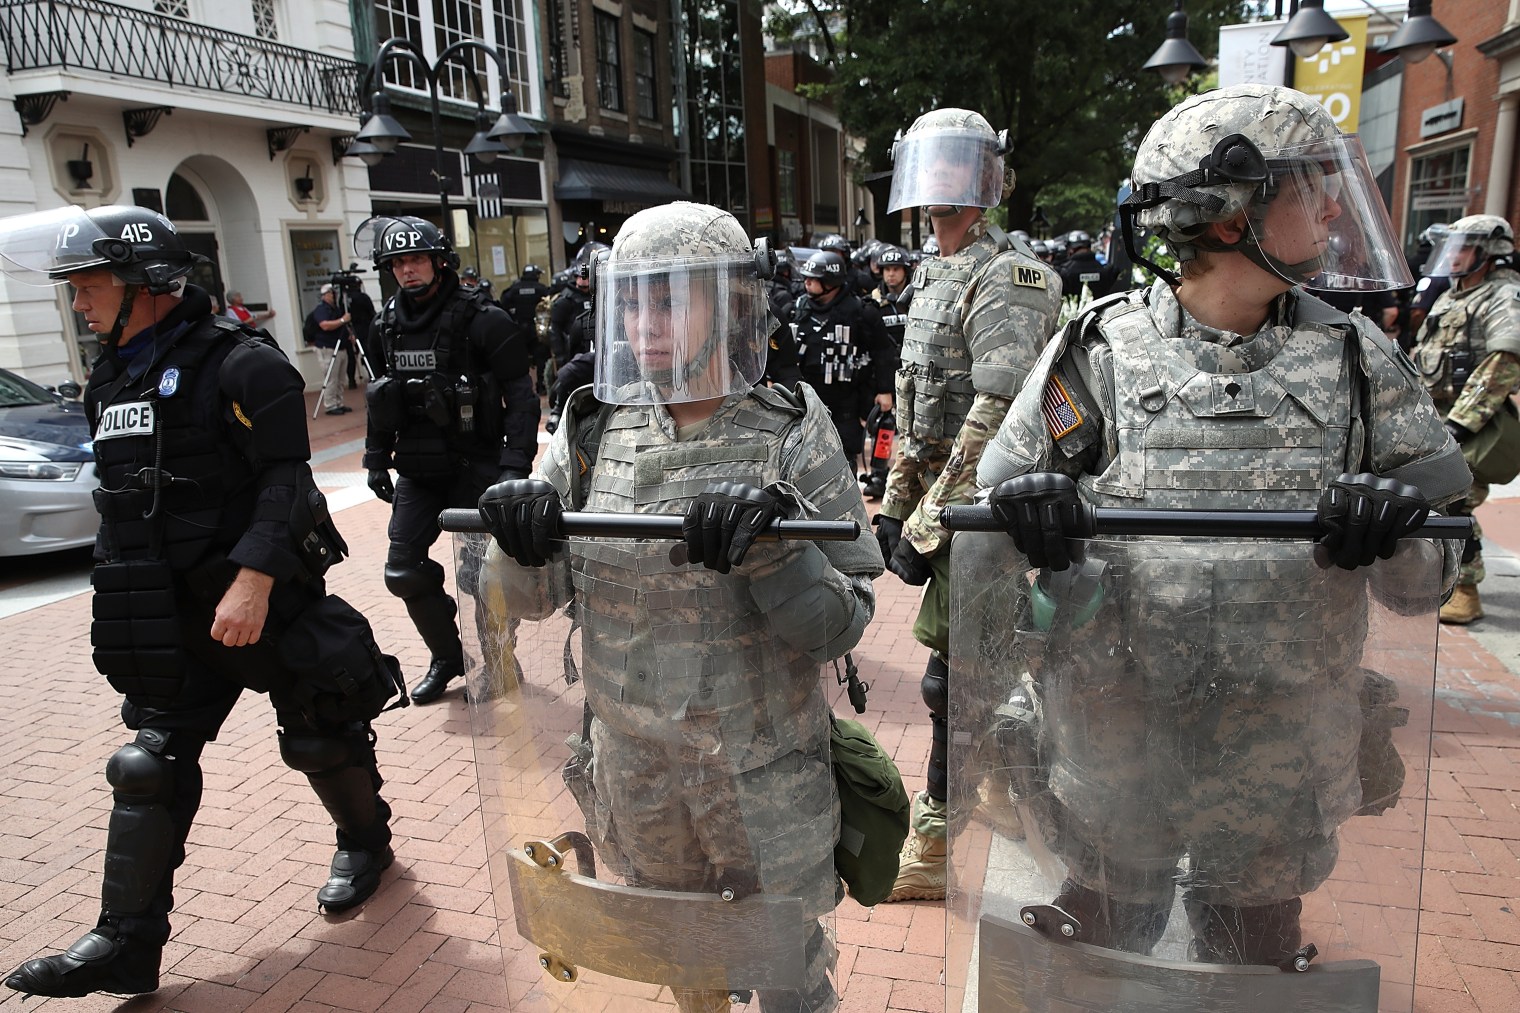 Police and members of the National Guard patrol near the location where a car plowed into a crowd of people marching through a downtown shopping district in Charlottesville, Va., on Aug. 12, 2017.